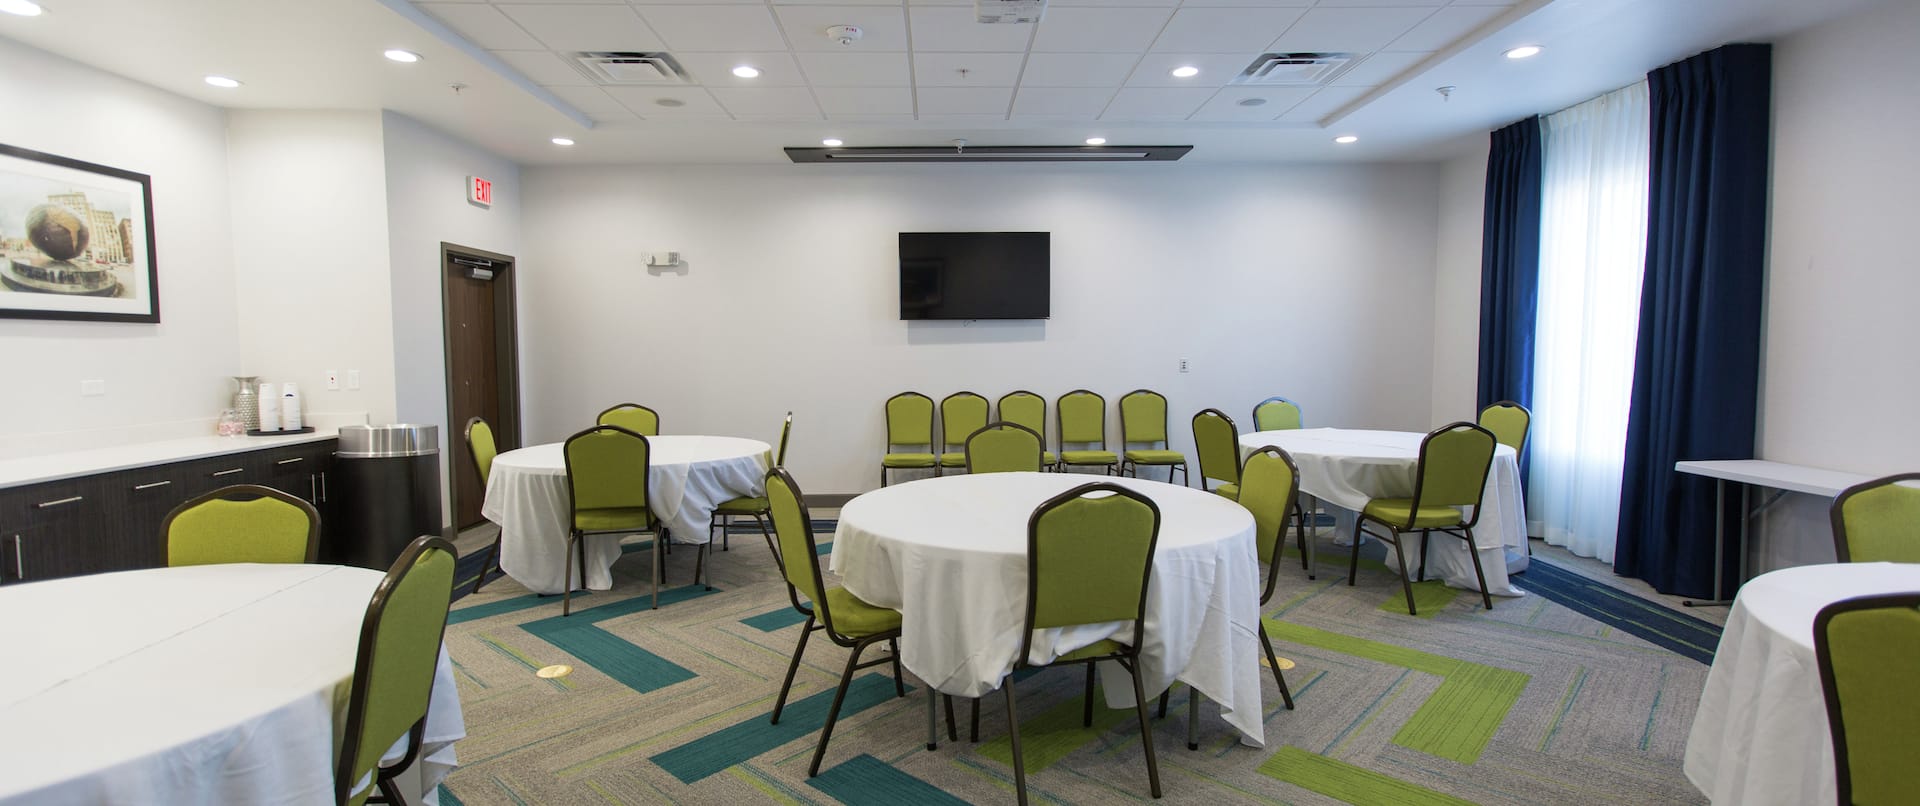 Meeting area with tables and chairs